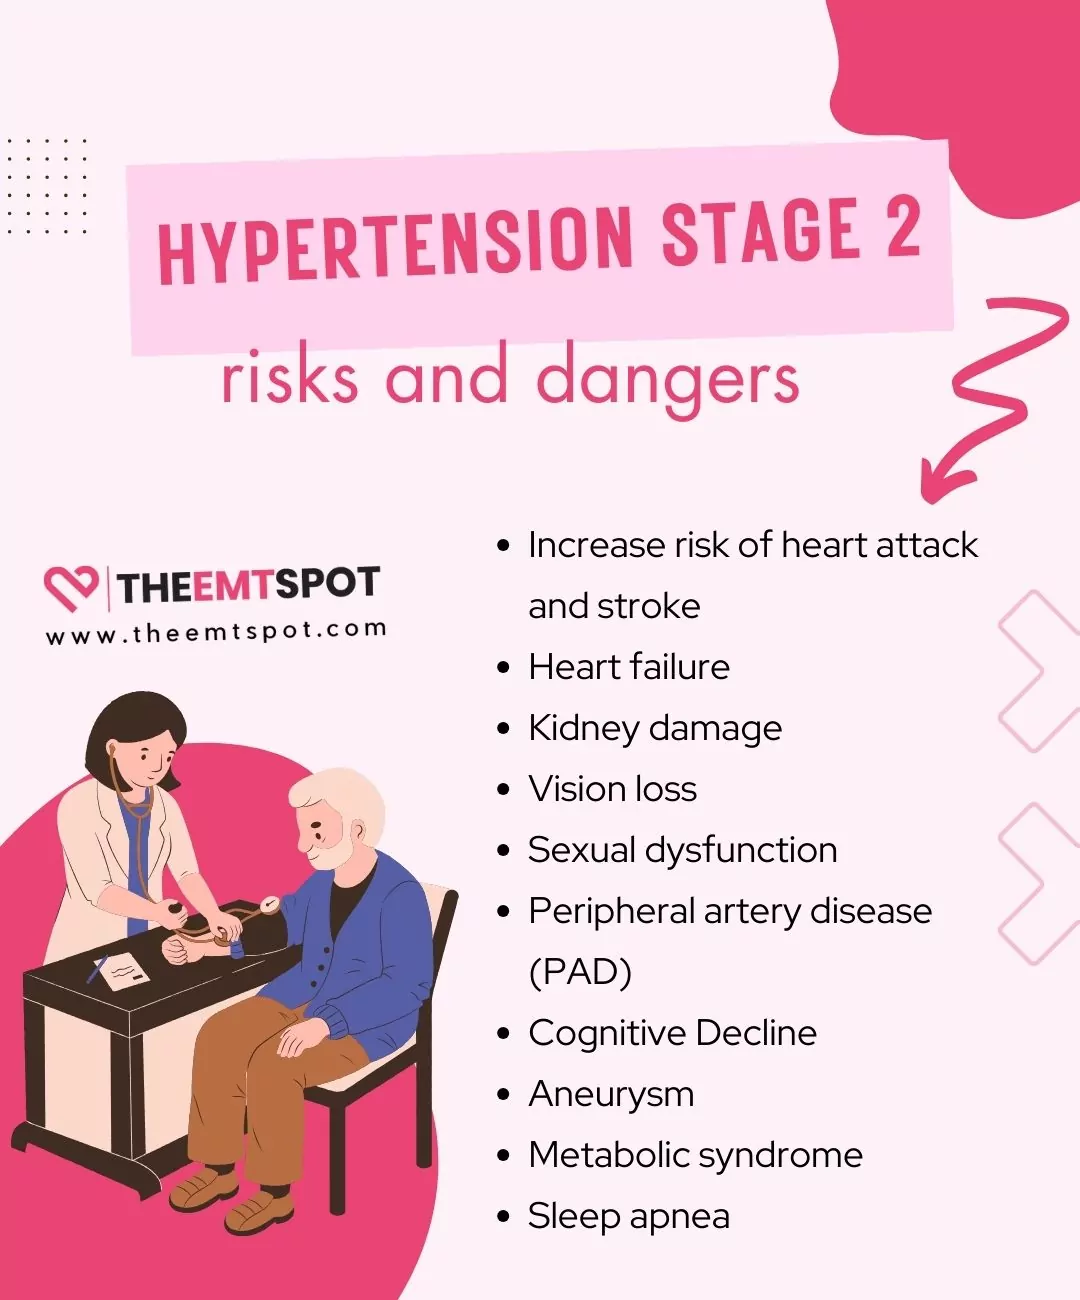 hypertension stage 2 risks and dangers